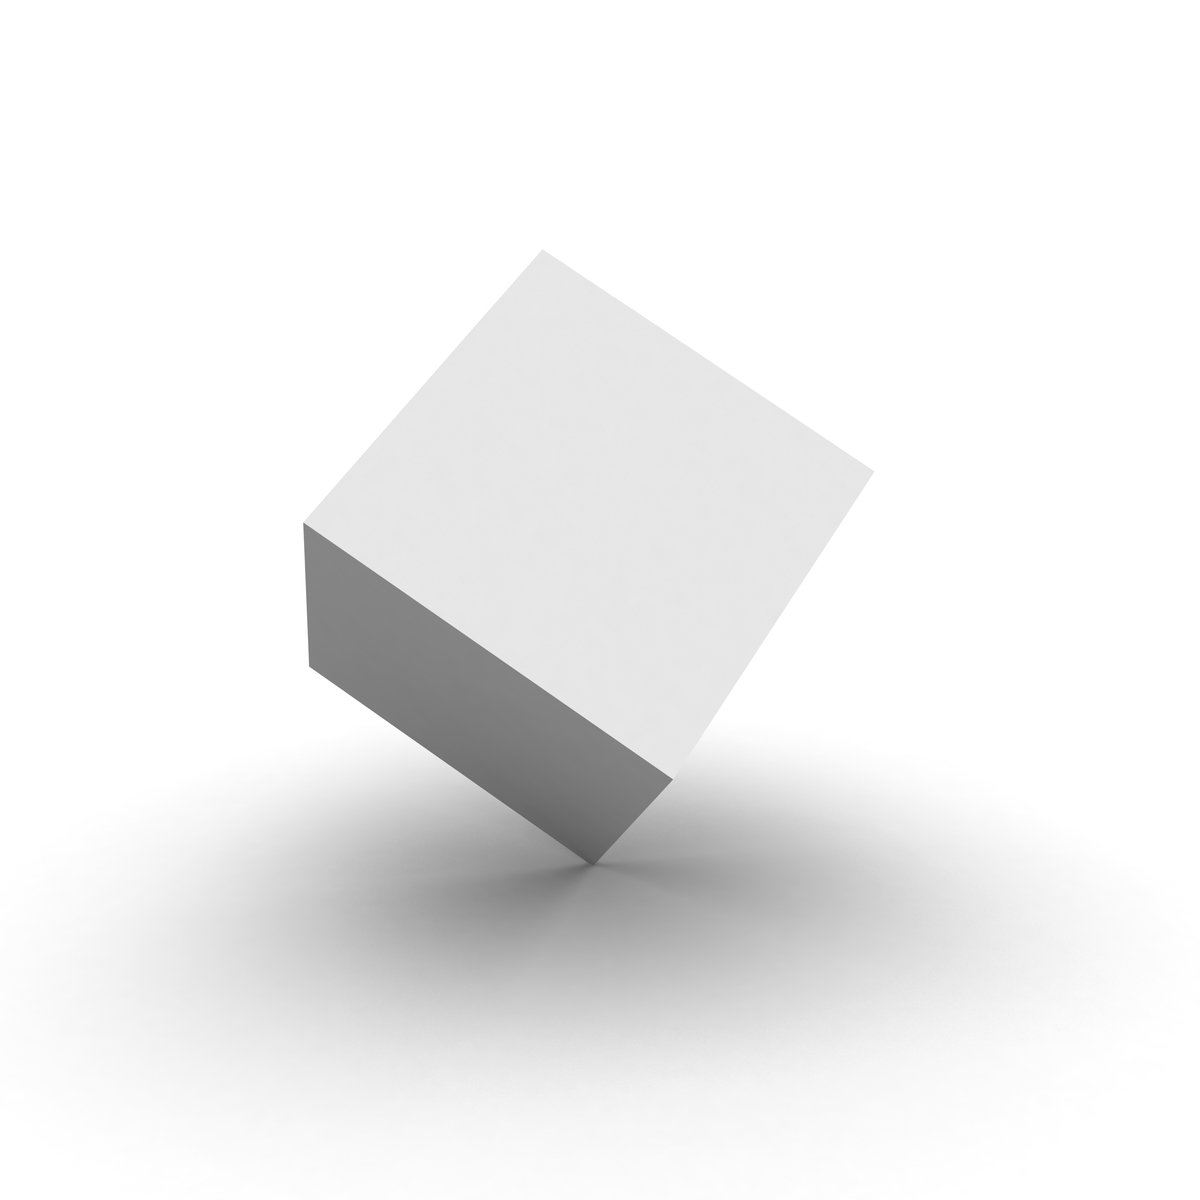 an empty square white object on a white background